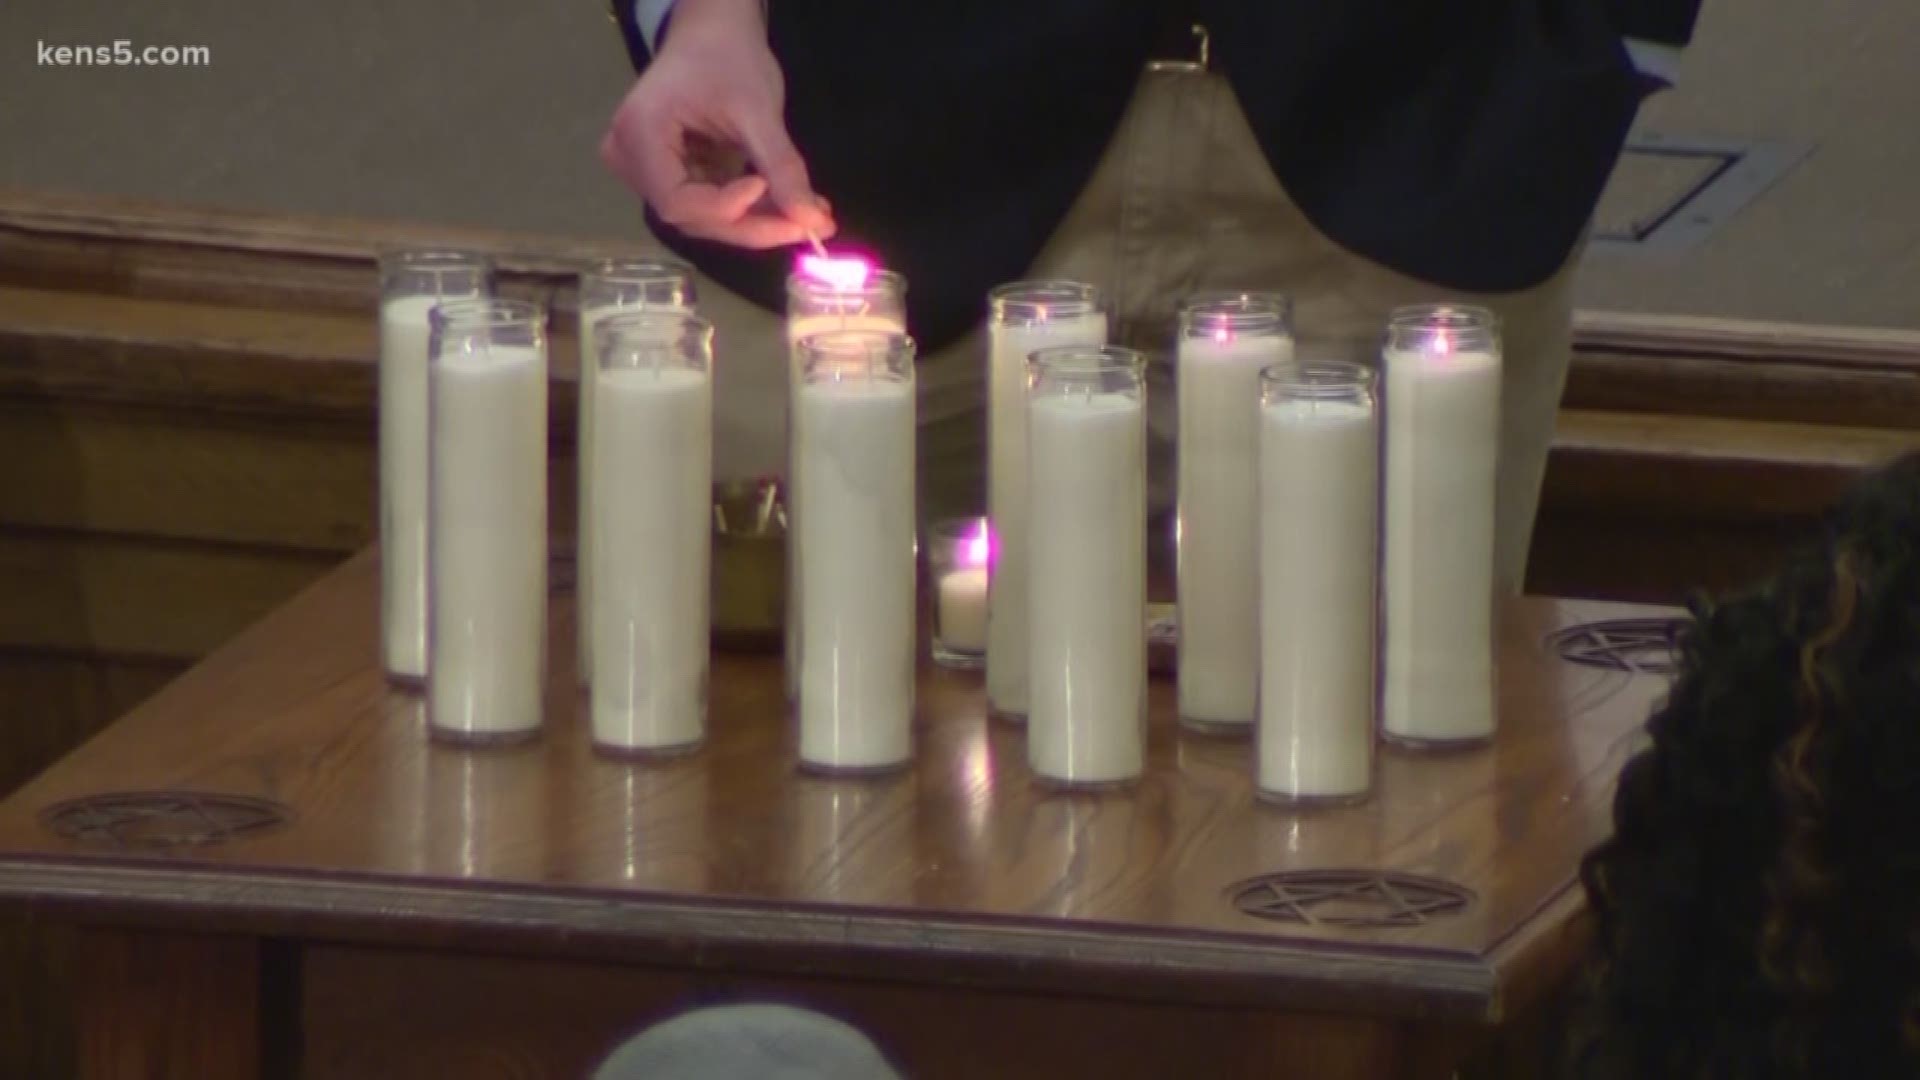 Here in San Antonio Tuesday, hundreds of people came to honor those killed at the synagogue in Pittsburgh. Eyewitness News reporter Roxie Bustamante has more.